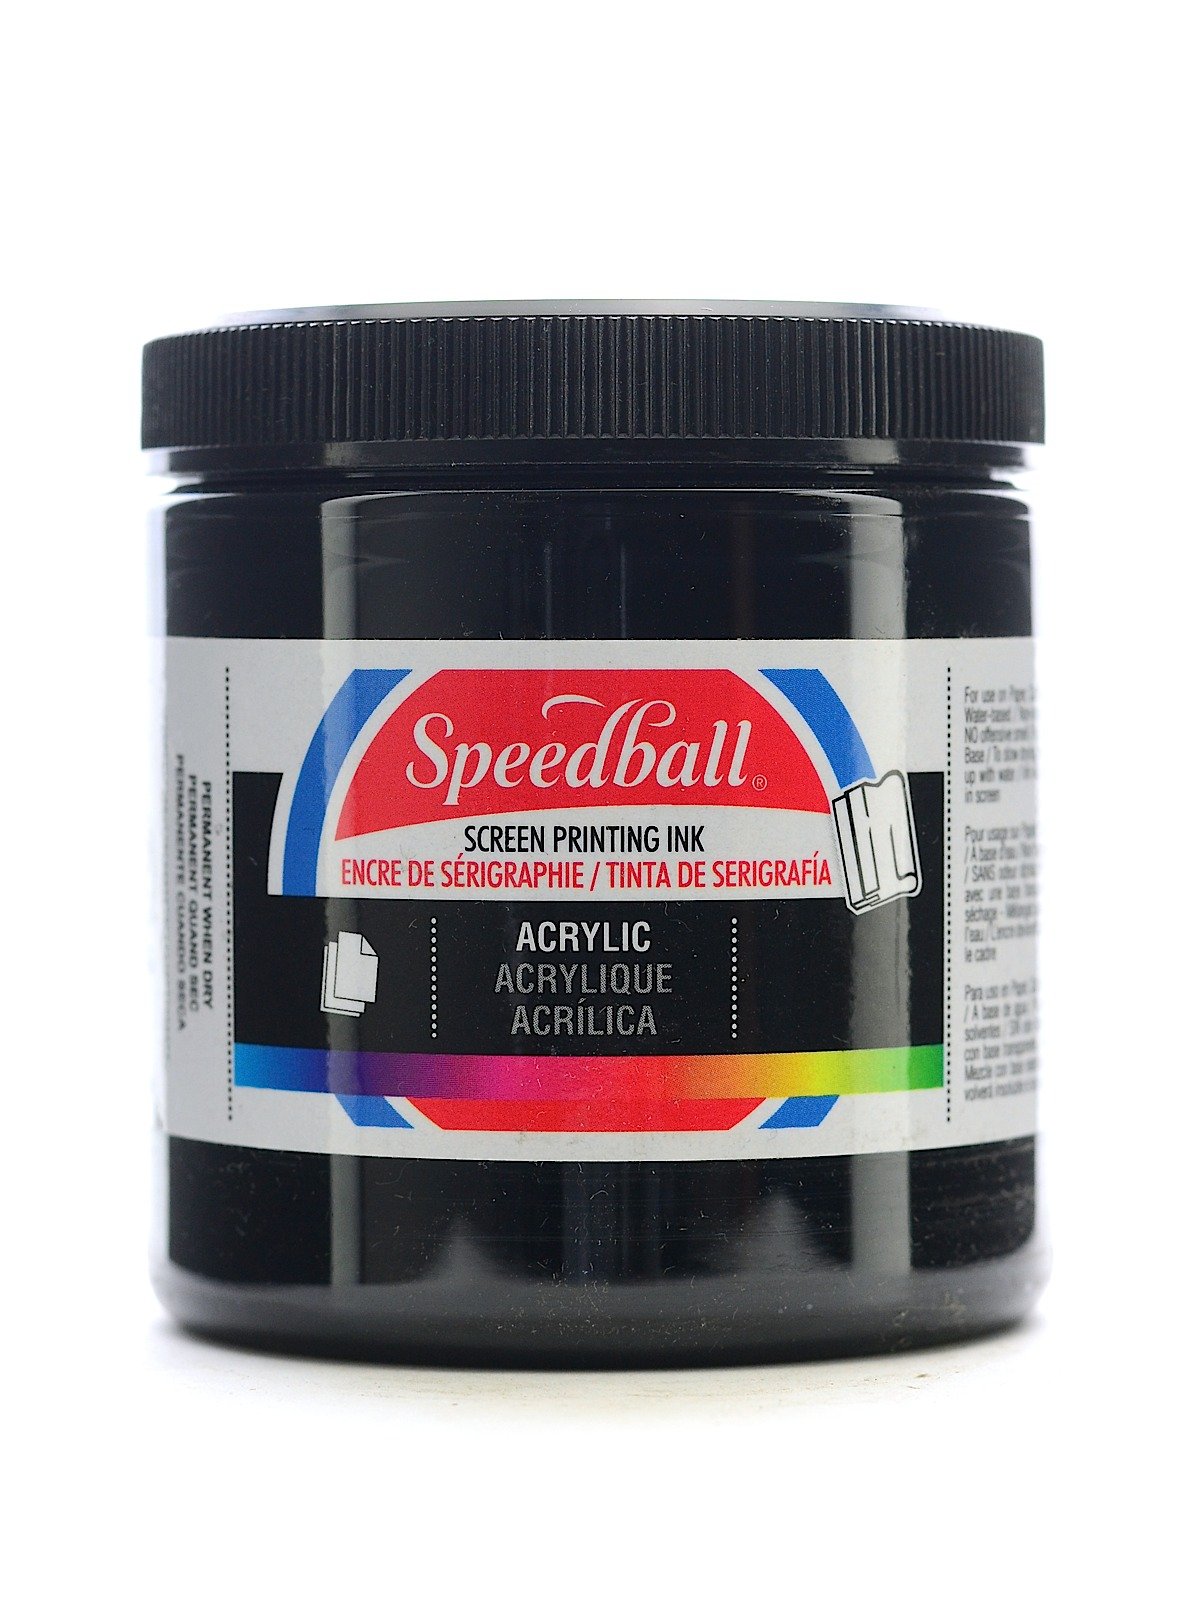 Speedball 4629 00 Acrylic Screen Printing Ink 8oz Silver for sale